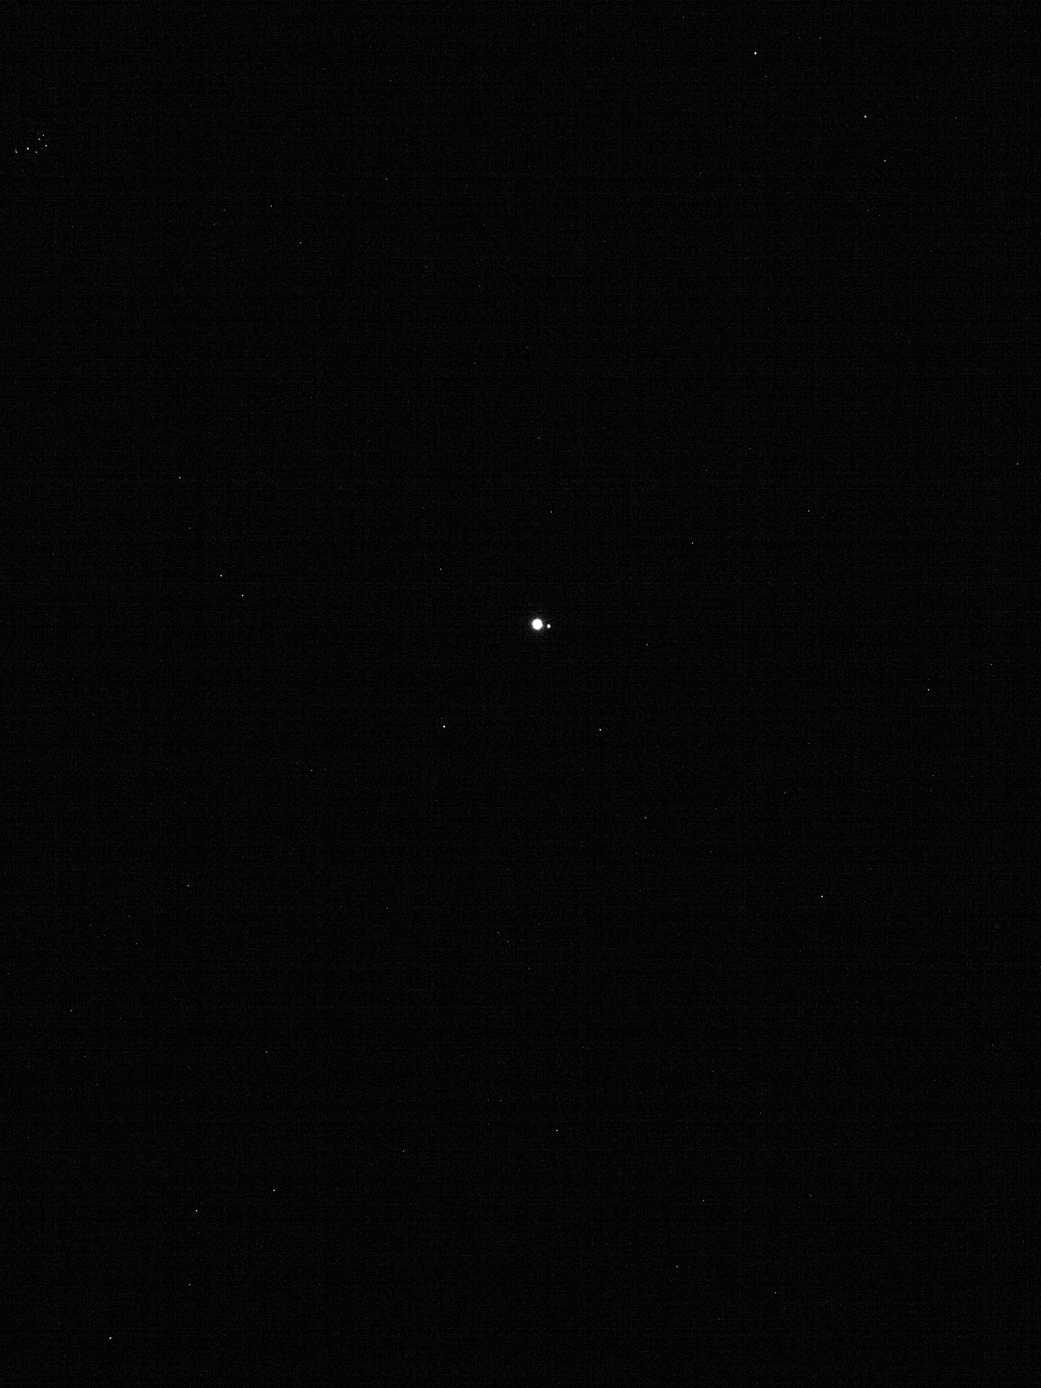 Earth and Moon, captured by NASA’s OSIRIS-REx spacecraft 